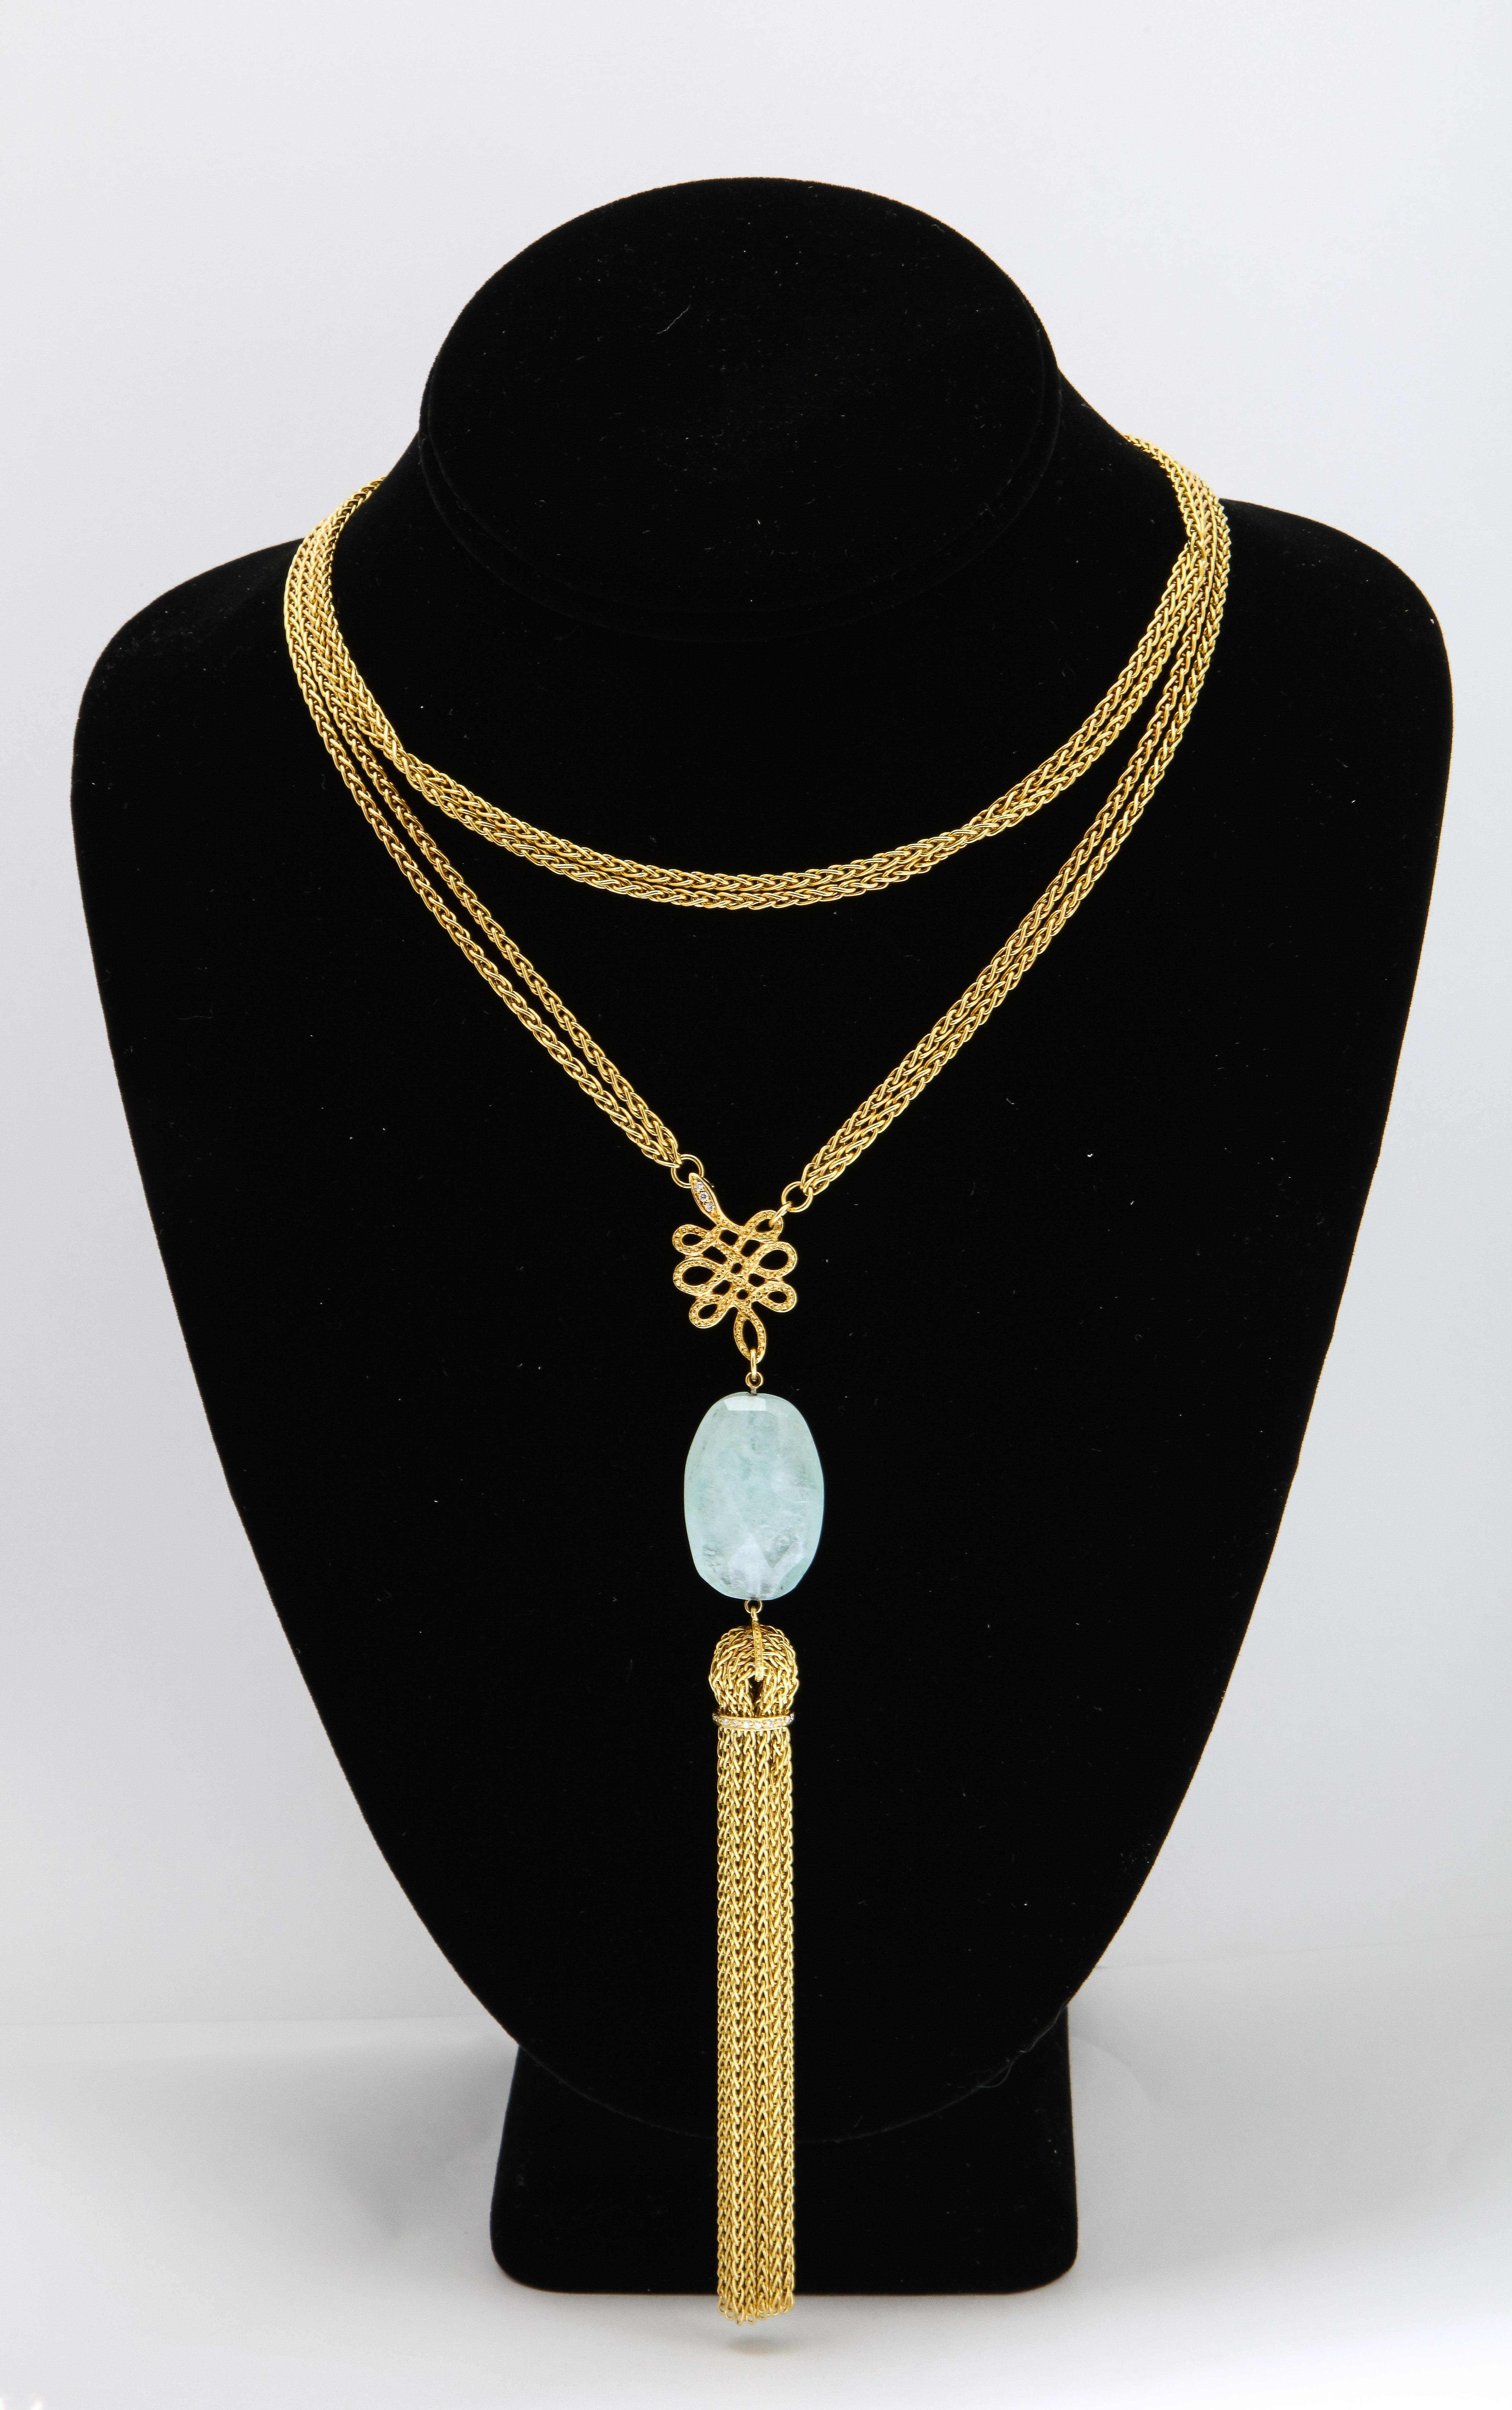 18kt Yellow Gold Long Tassel -Fringe Style Chain Necklace Designed With A 29 MM Rough Cut Aquamarine And Also Embellished With Full Cut Diamonds Throughout.Created By H.Stern In The 1980's.Finished With An Easy Watch Chain Type Clasp For Easy